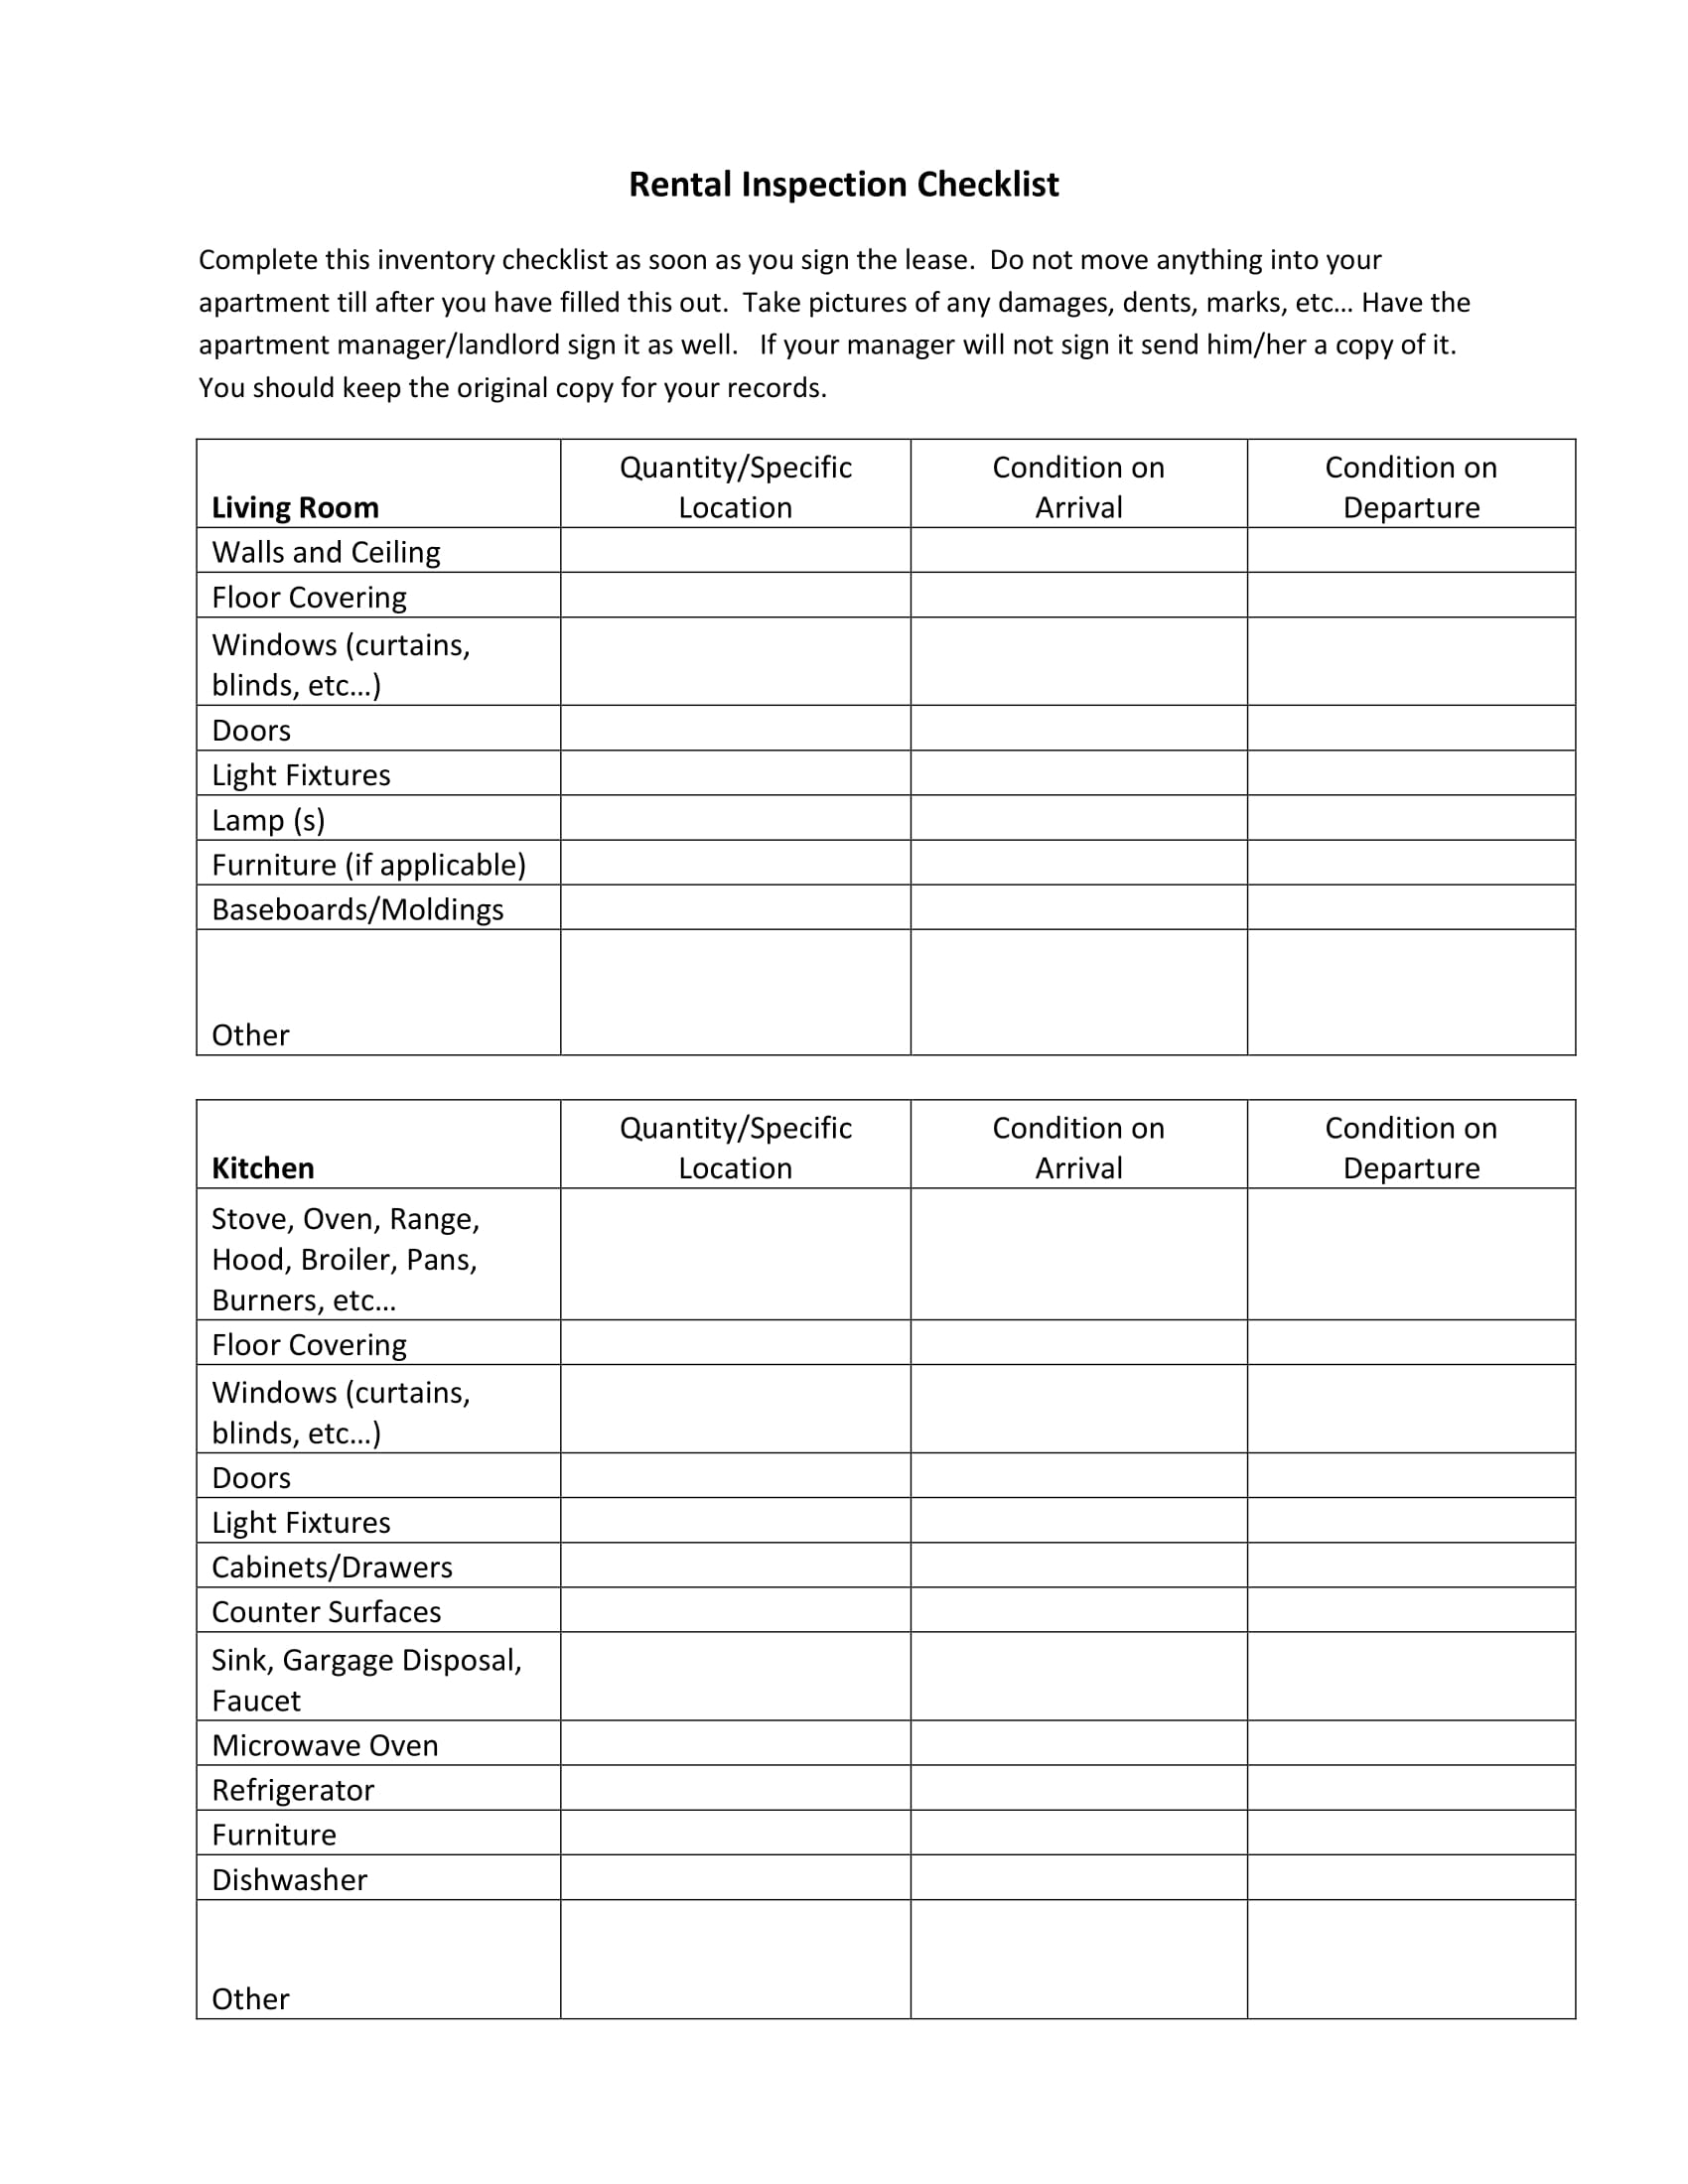 10+ Rental Checklist Examples – PDF  Examples For Condition Of Rental Property Checklist Template